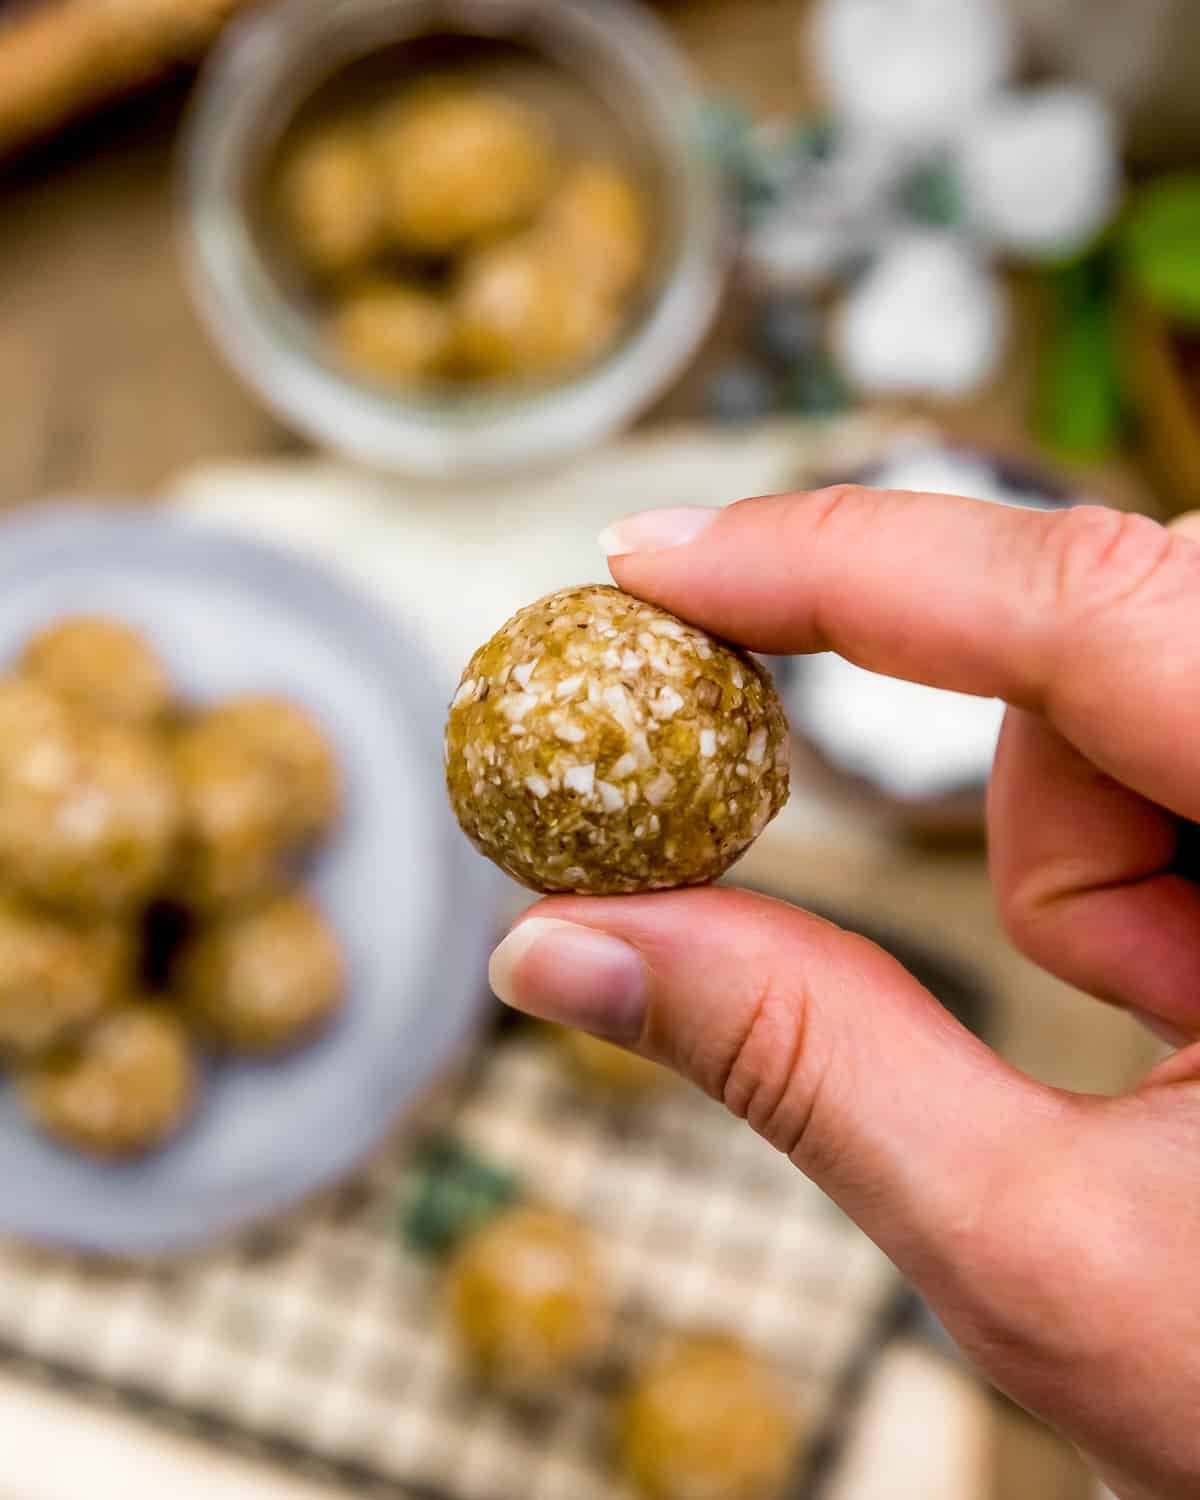 Holding a No Bake Apricot-Coconut Bliss Ball